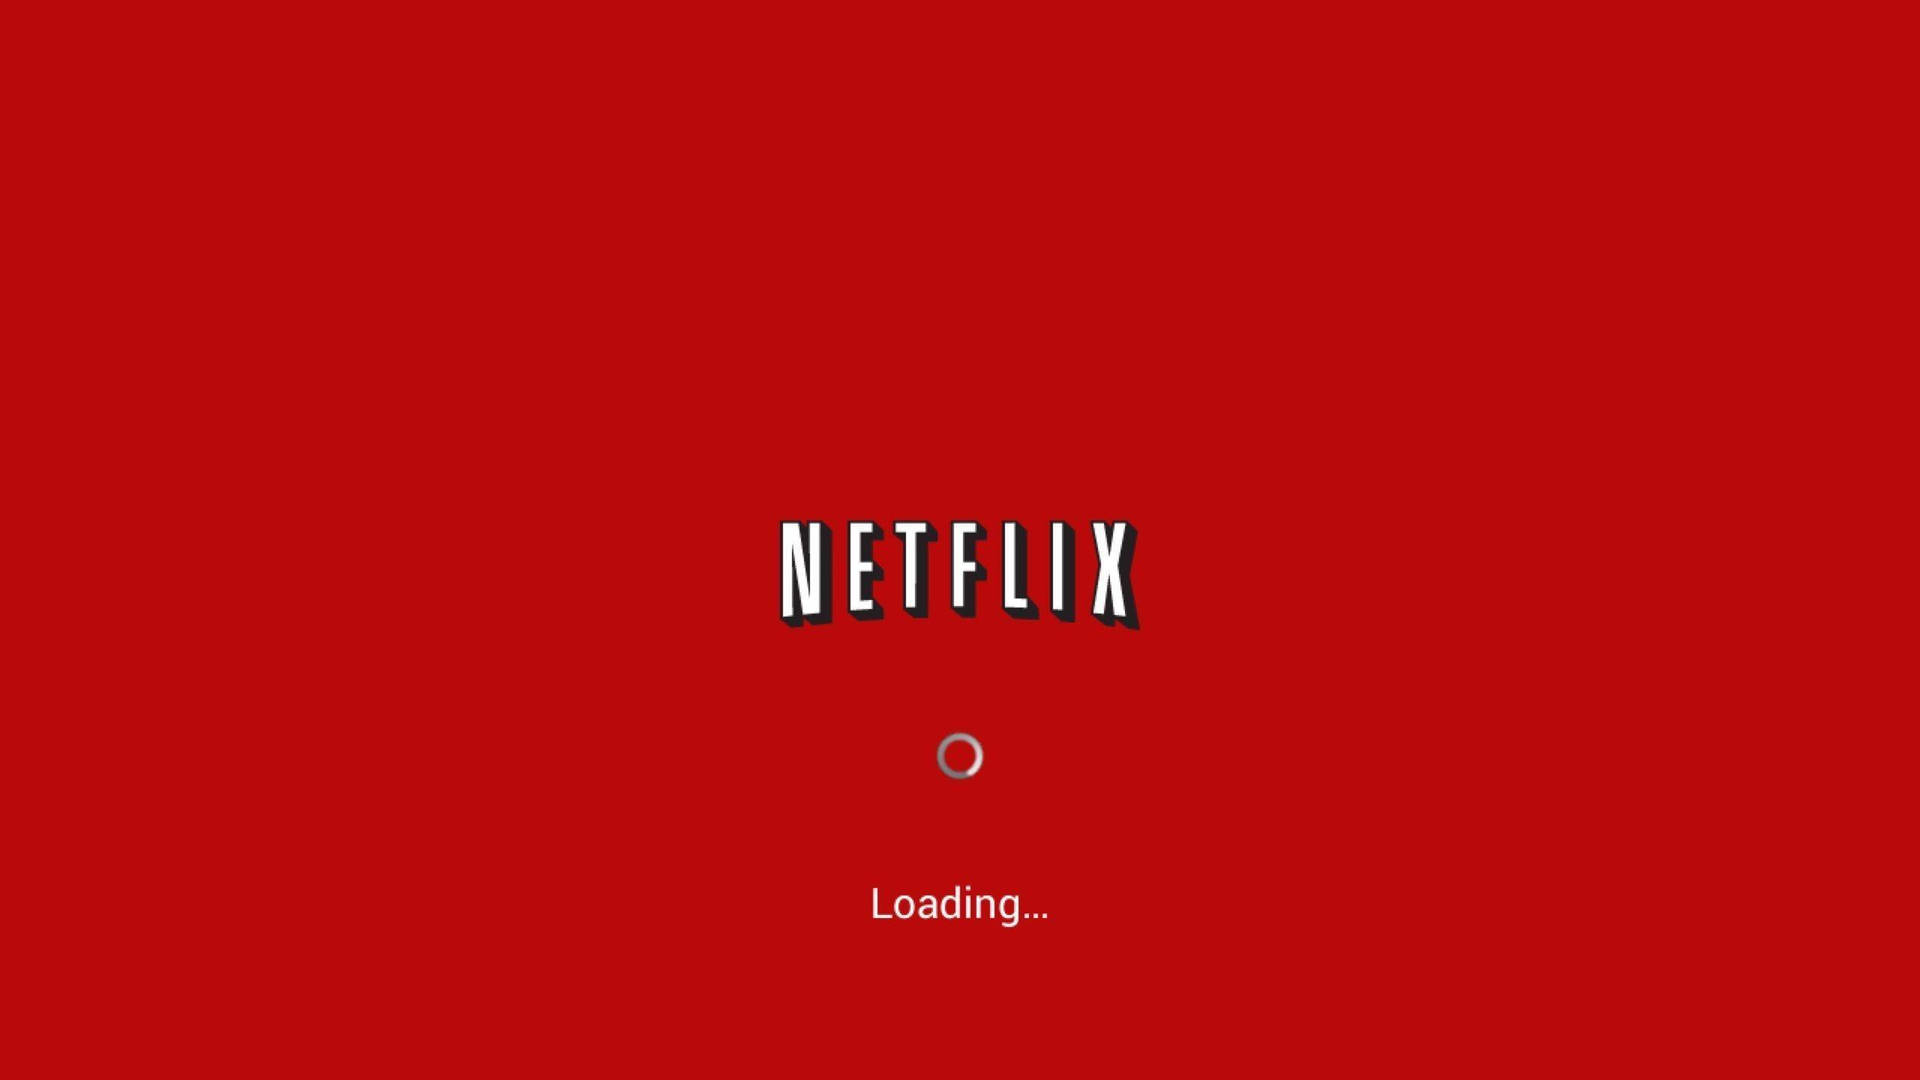 Streaming Unlimited Entertainment On Netflix Background